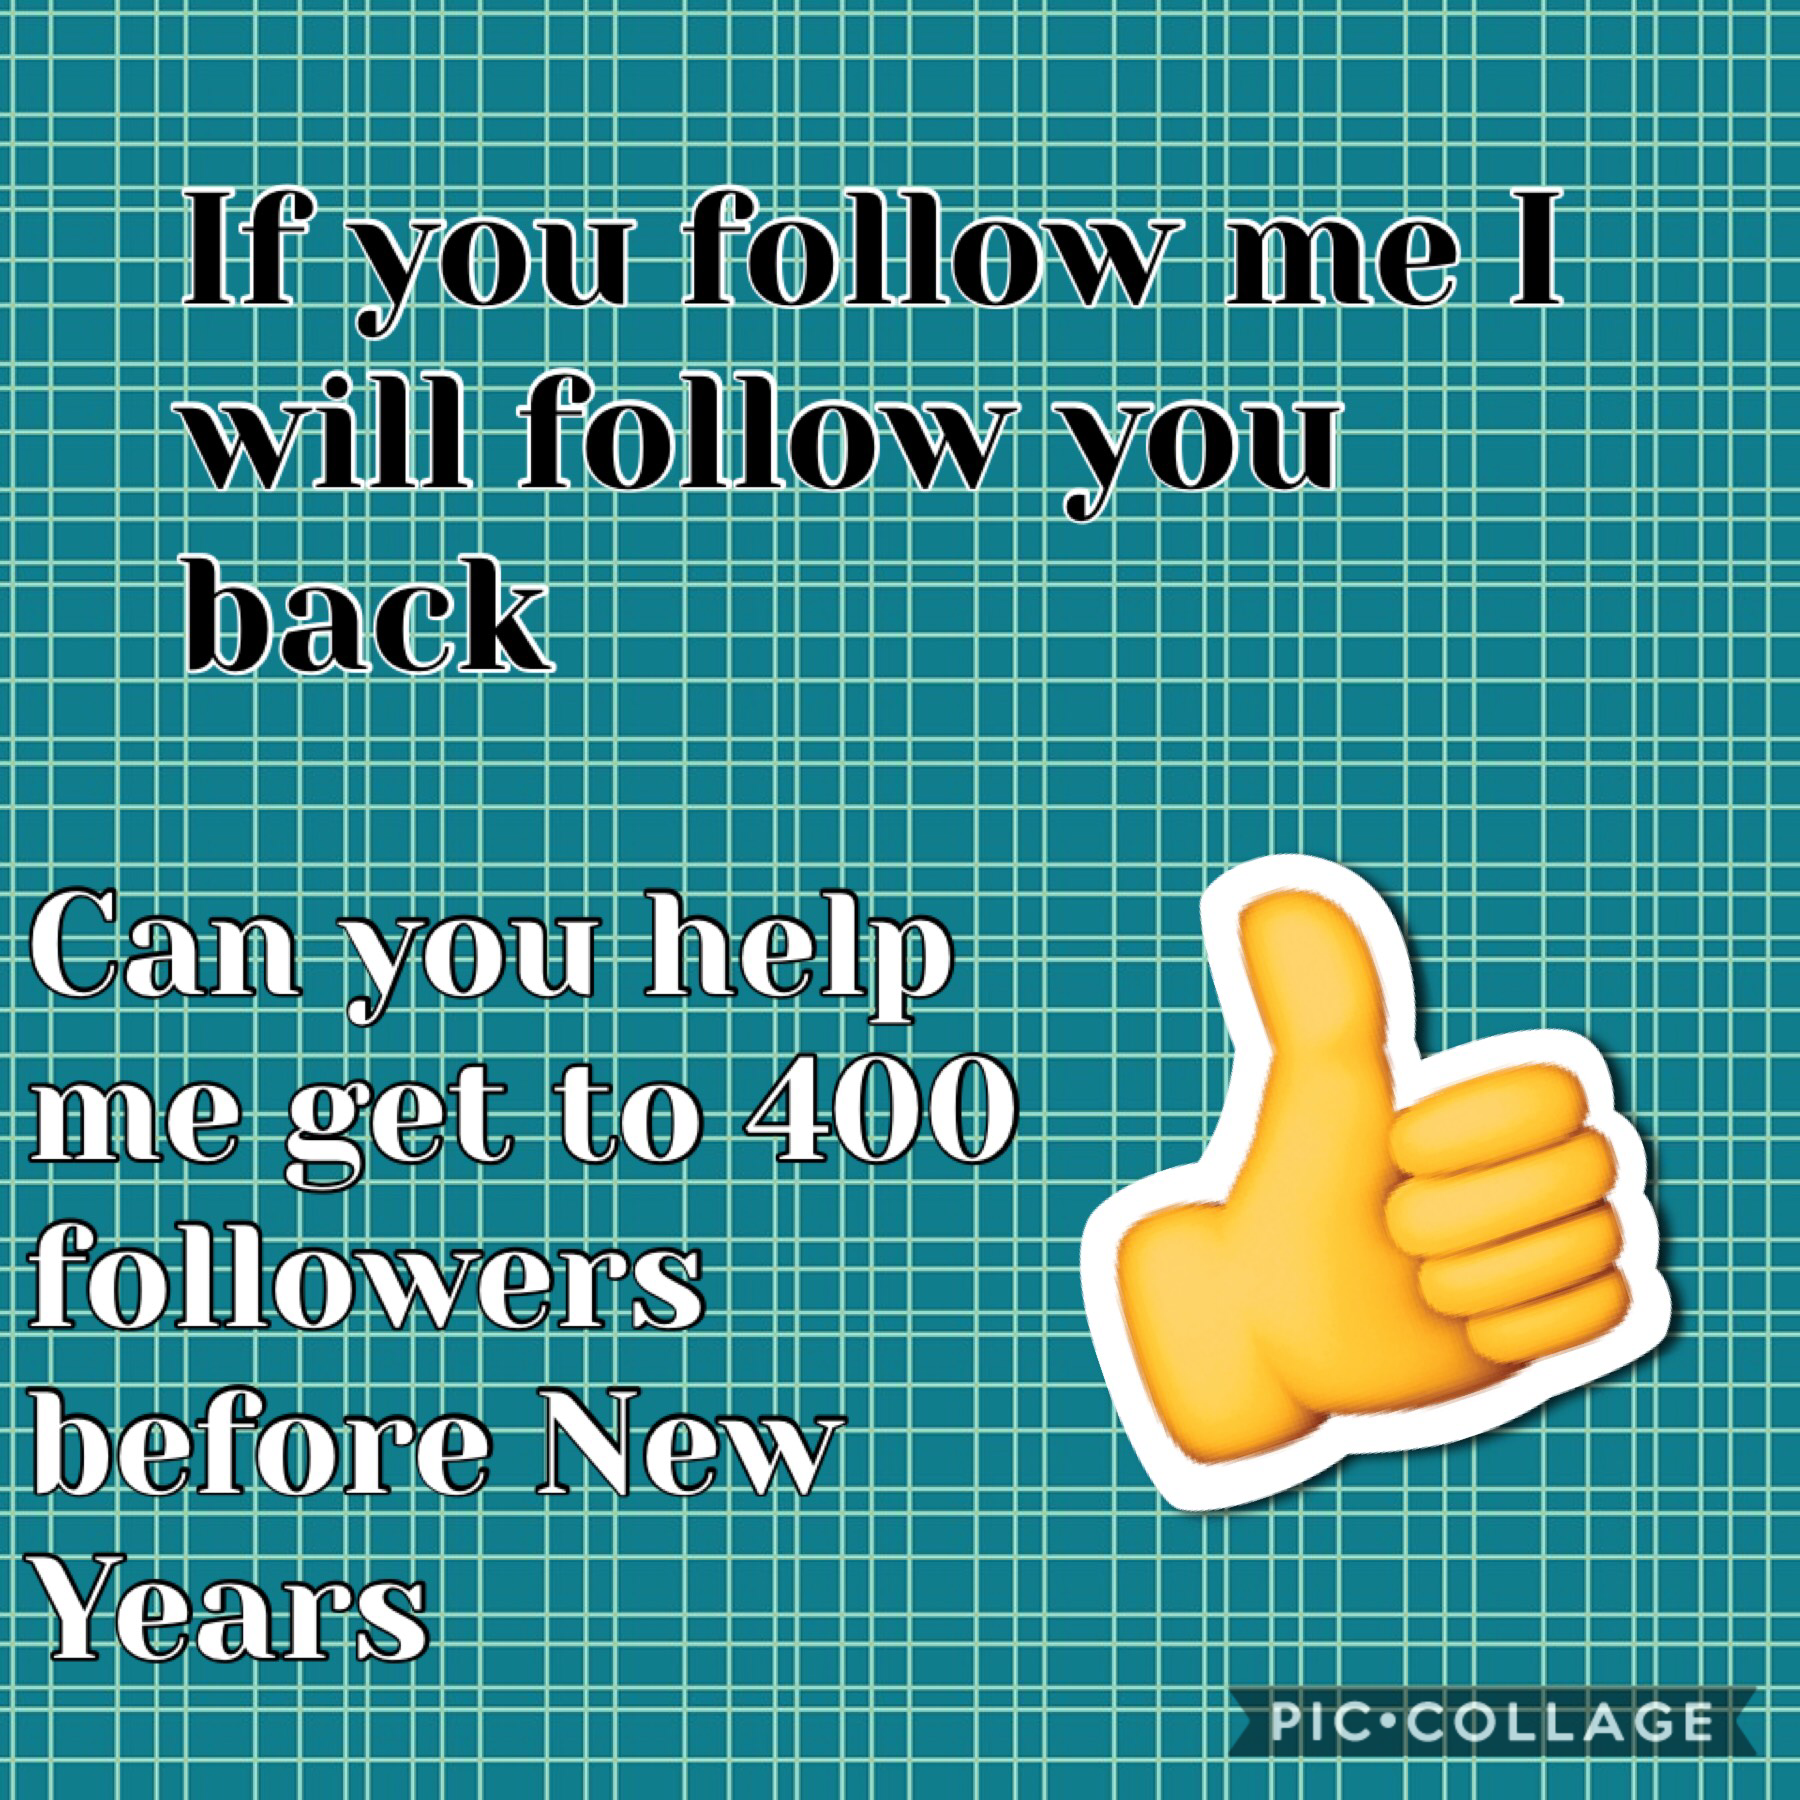 Can you help get me to 400 followers before New Years????